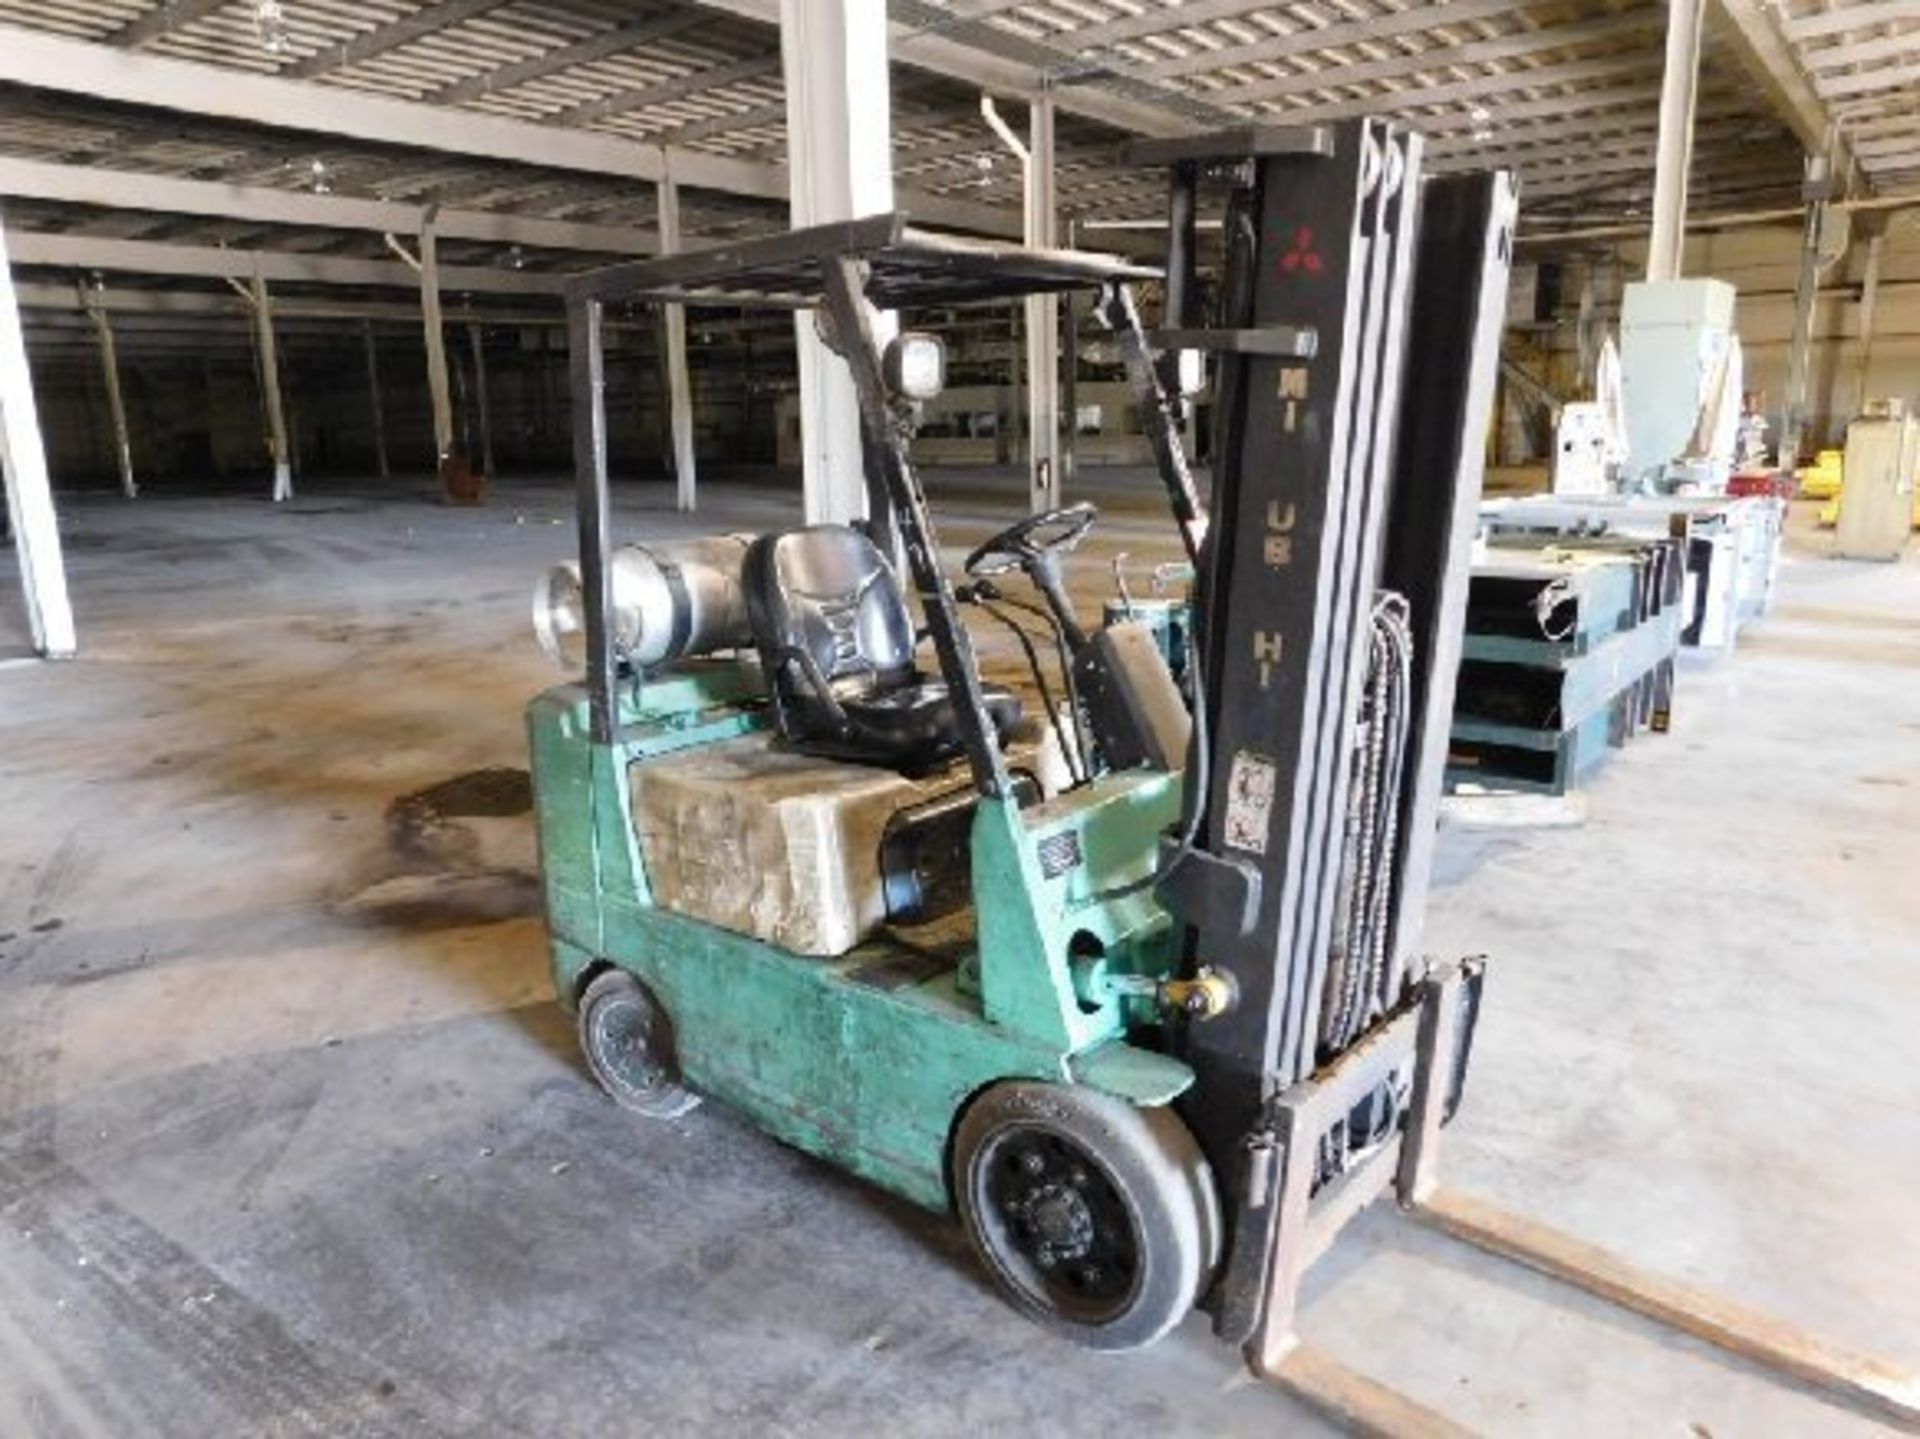 Mitsubishi FGC25 Forklift, 5,000lb. 139" Lift Height, LP Gas, 3 Stage Mast, solid tires - THIS - Image 2 of 3